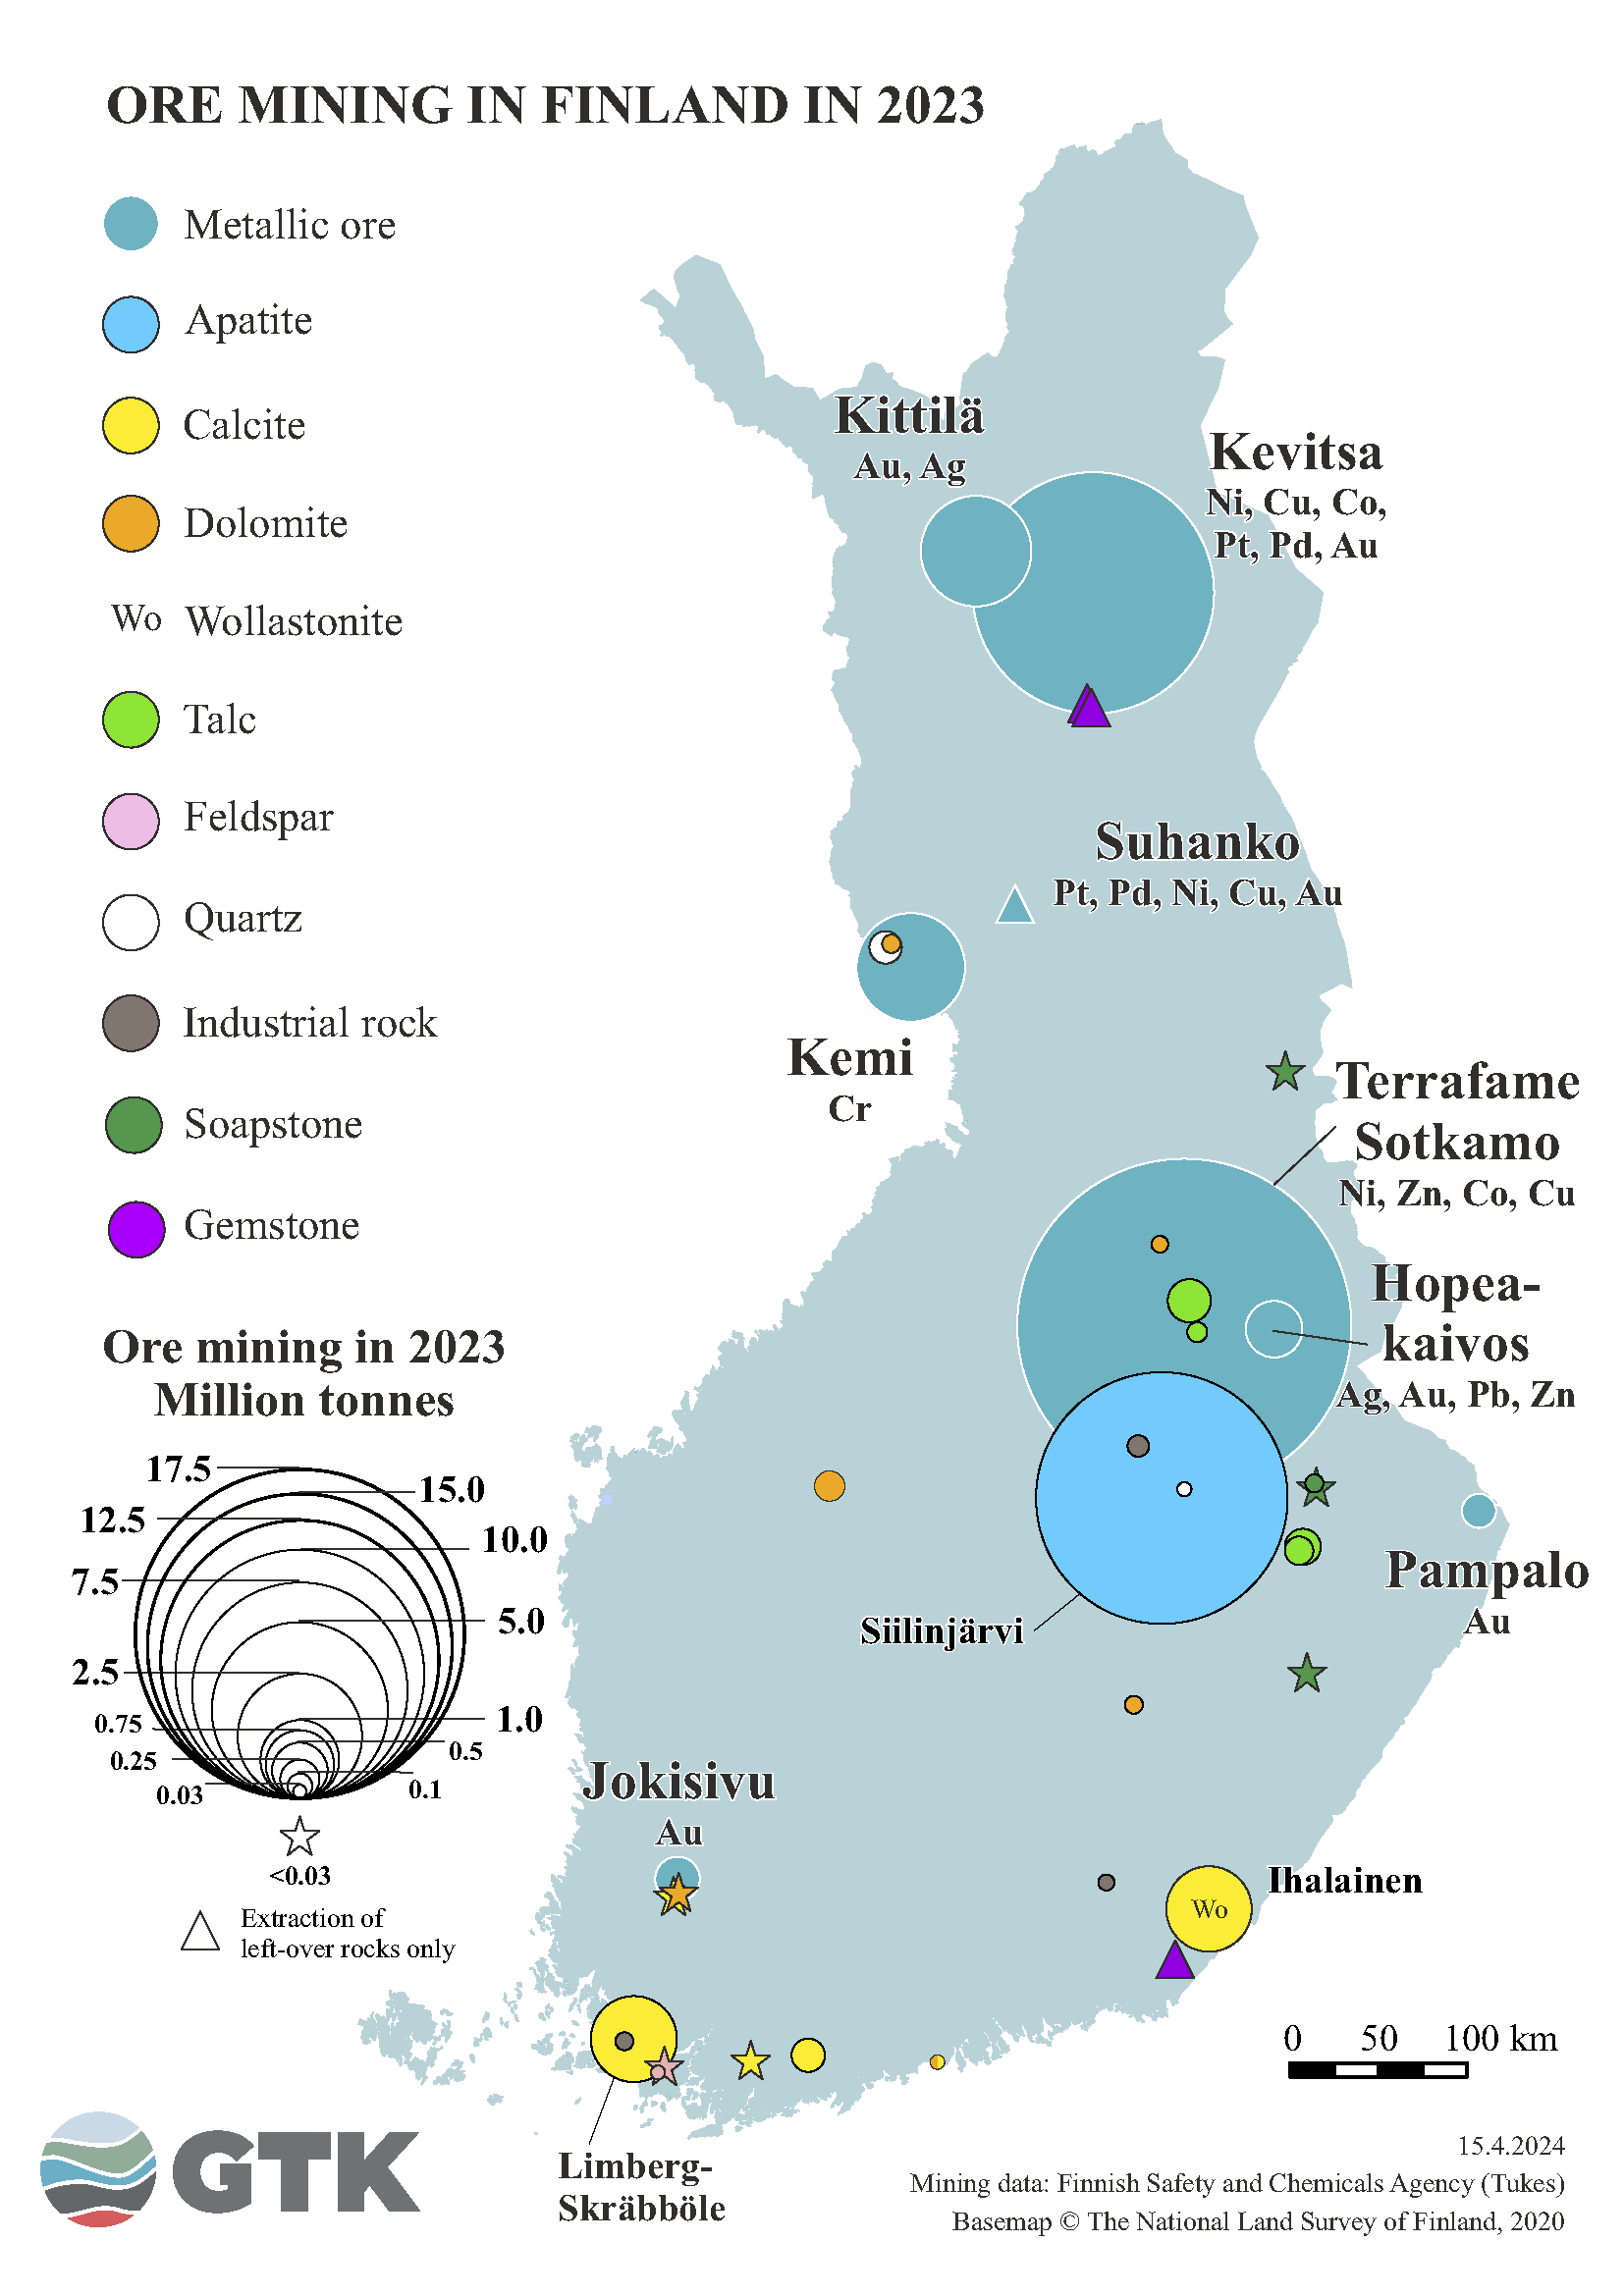 Ore mining on the map of Finland